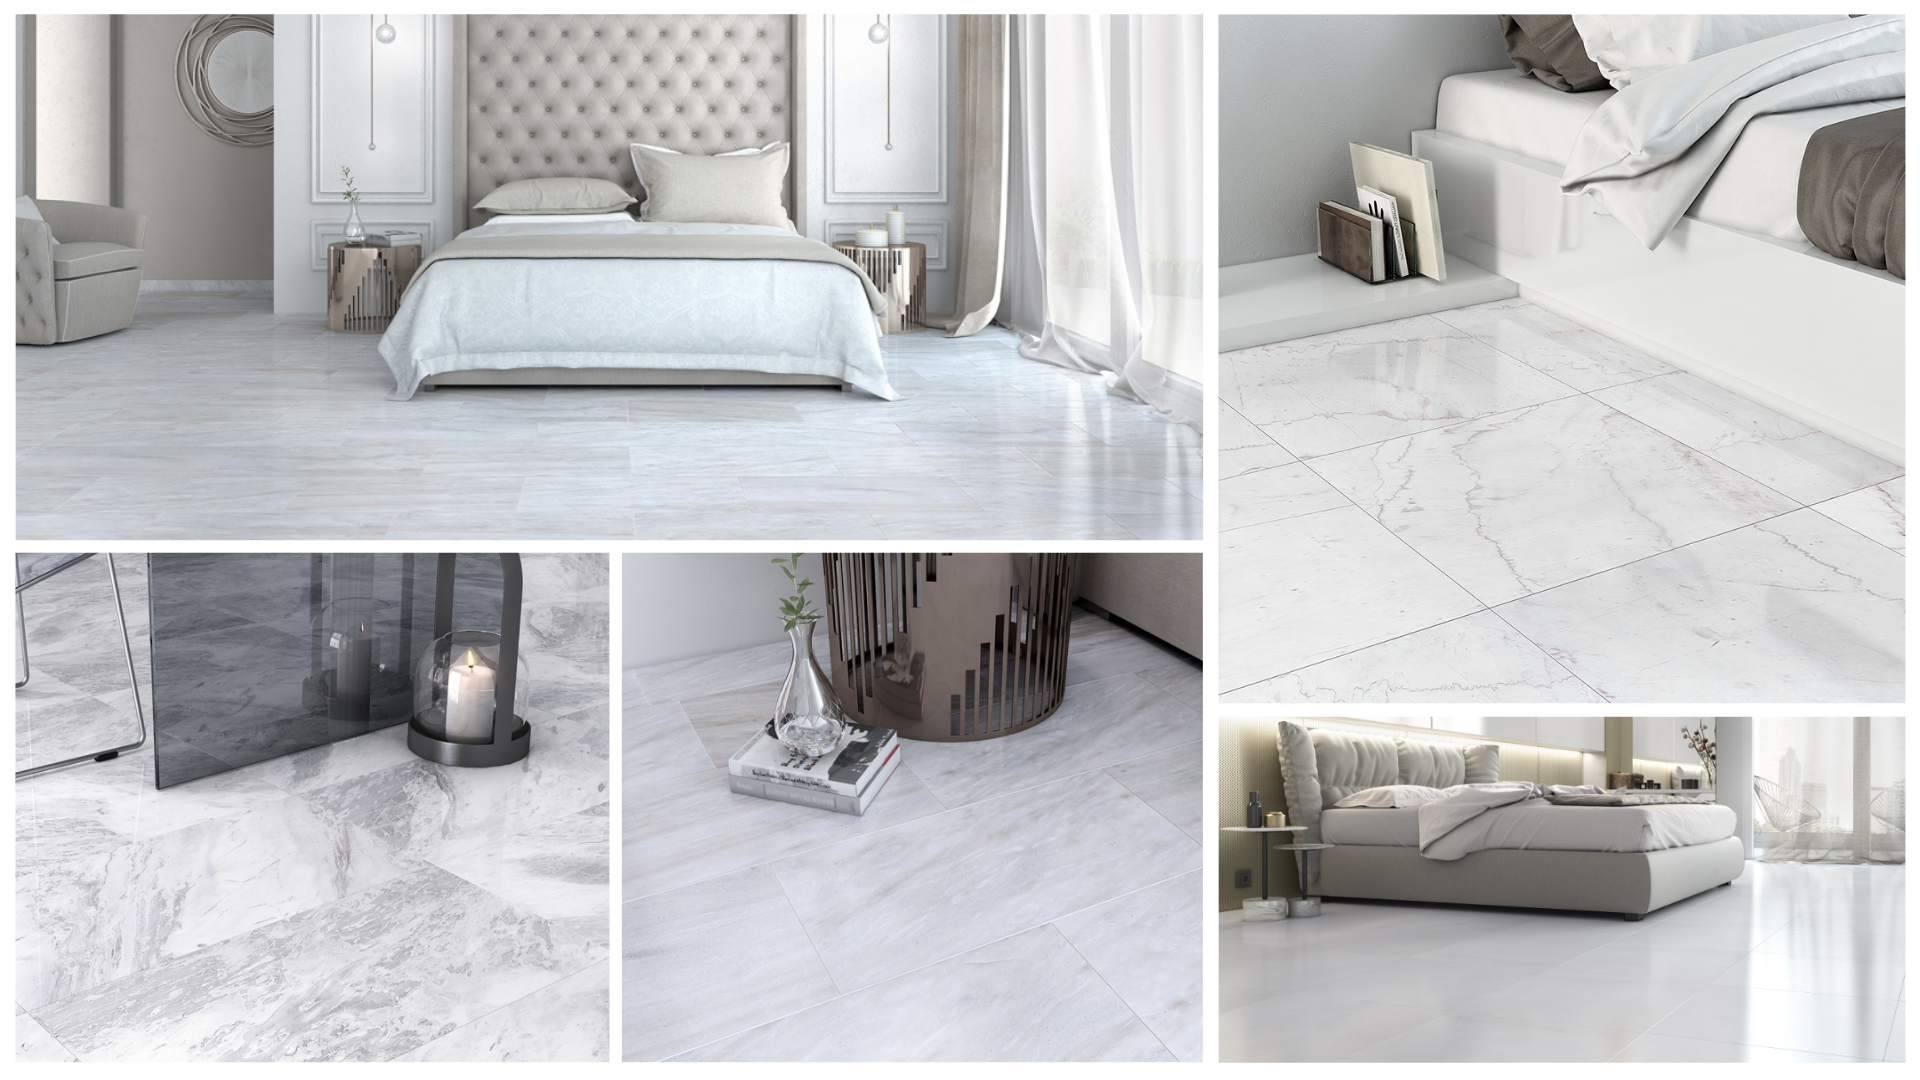 Collage image of 5 renderings with white marble flooring applied in bedrooms